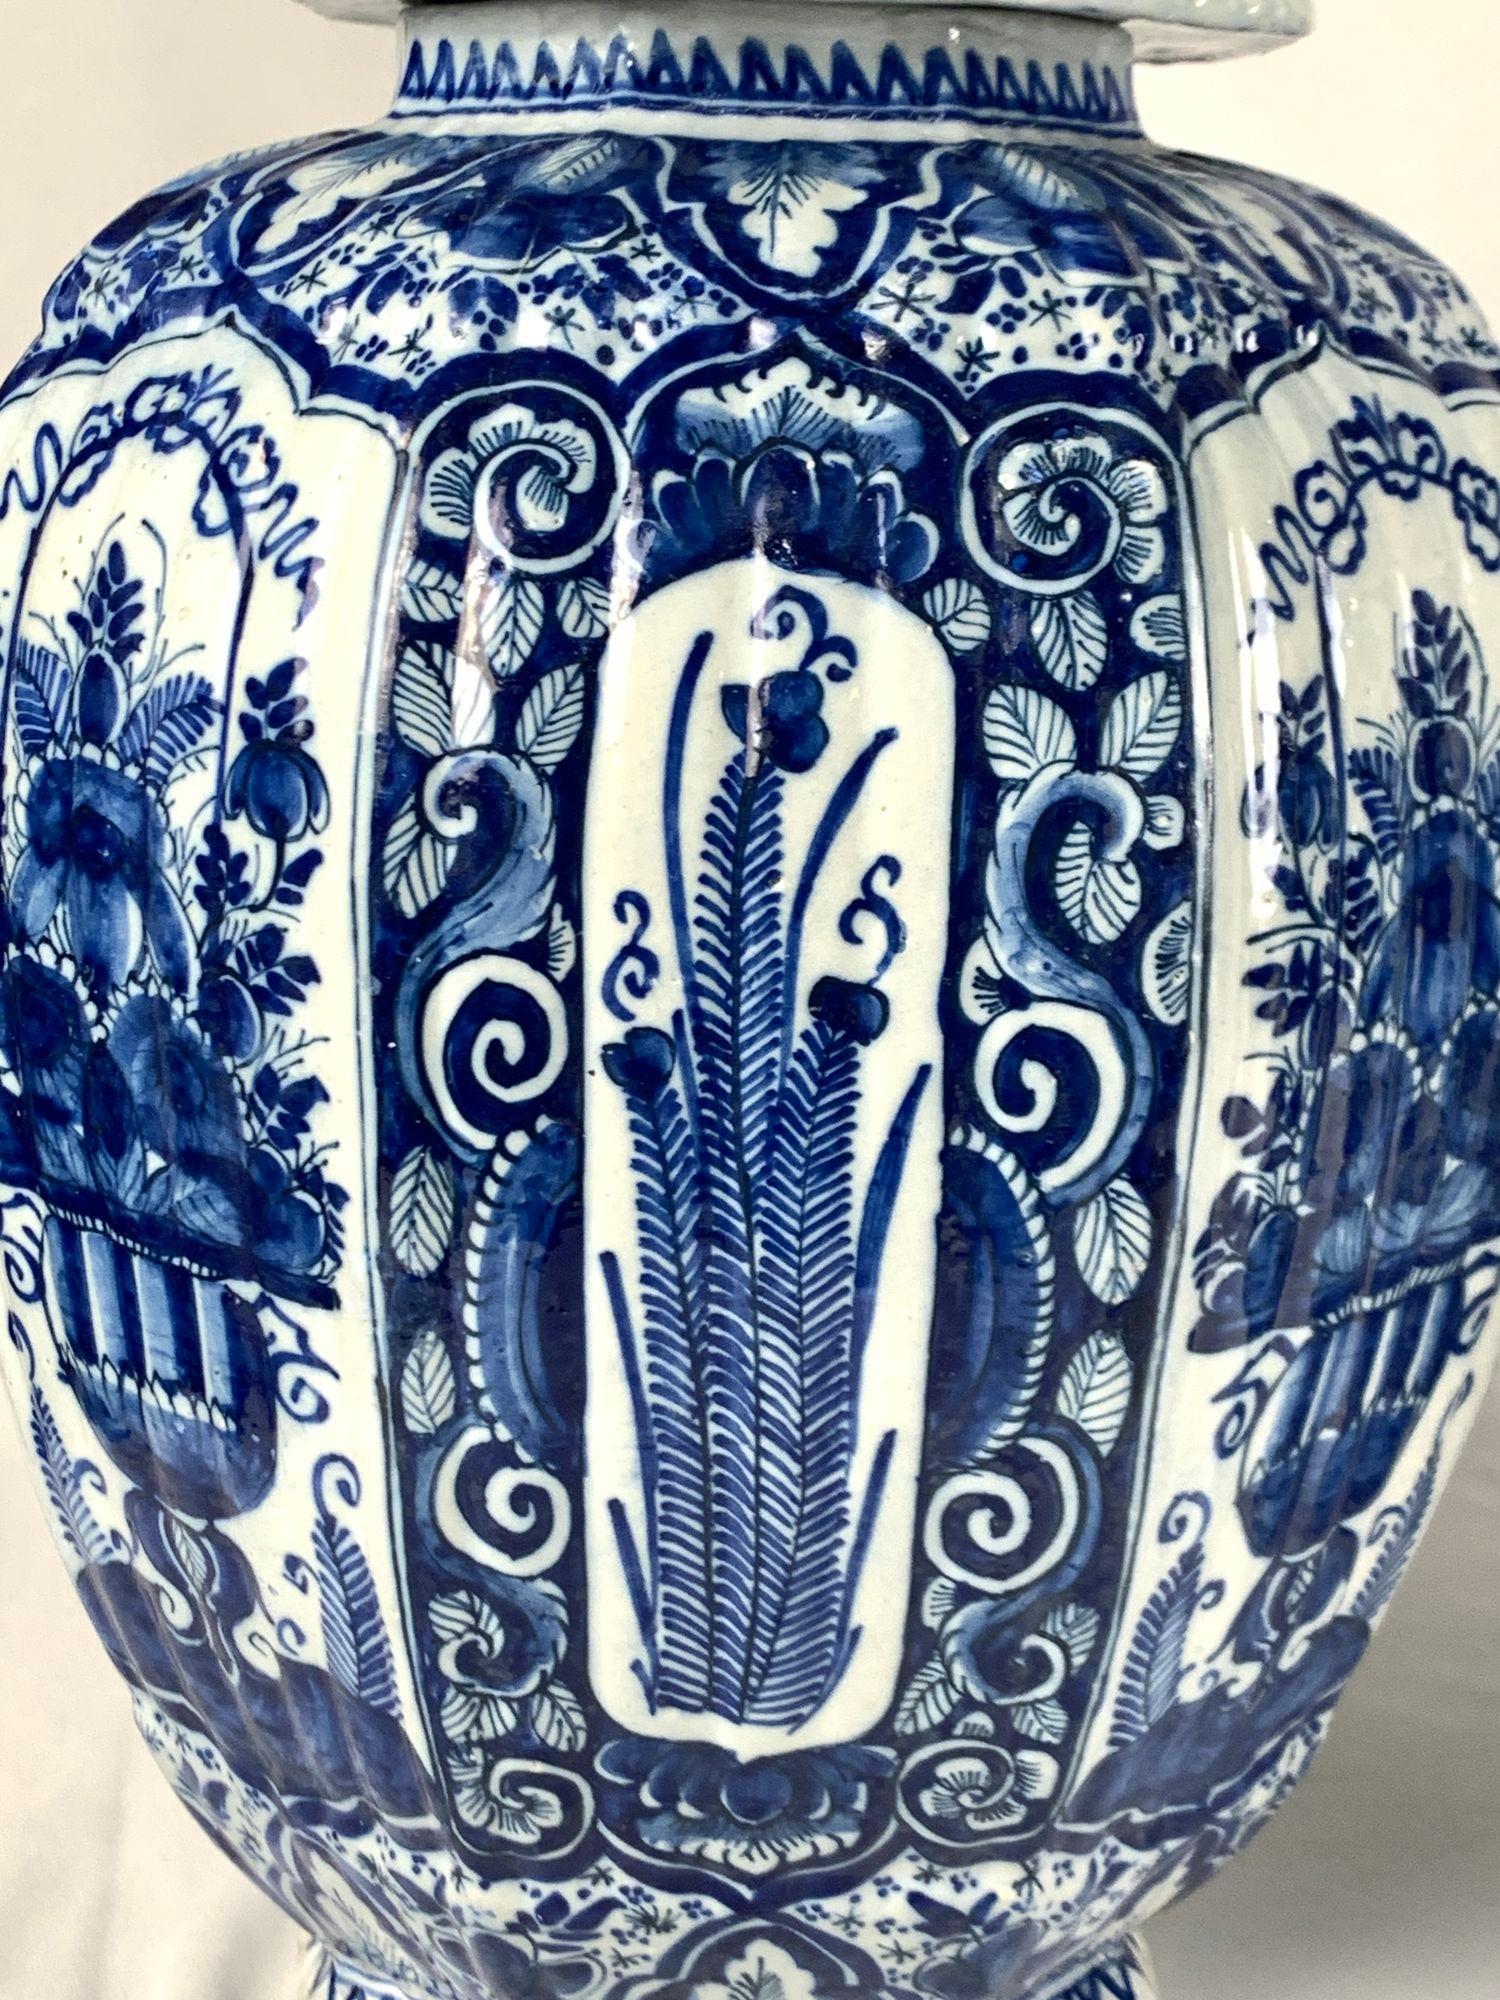 Large Blue and White Delft Jars Hand-Painted 18th Century Netherlands Circa 1780 In Excellent Condition For Sale In Katonah, NY